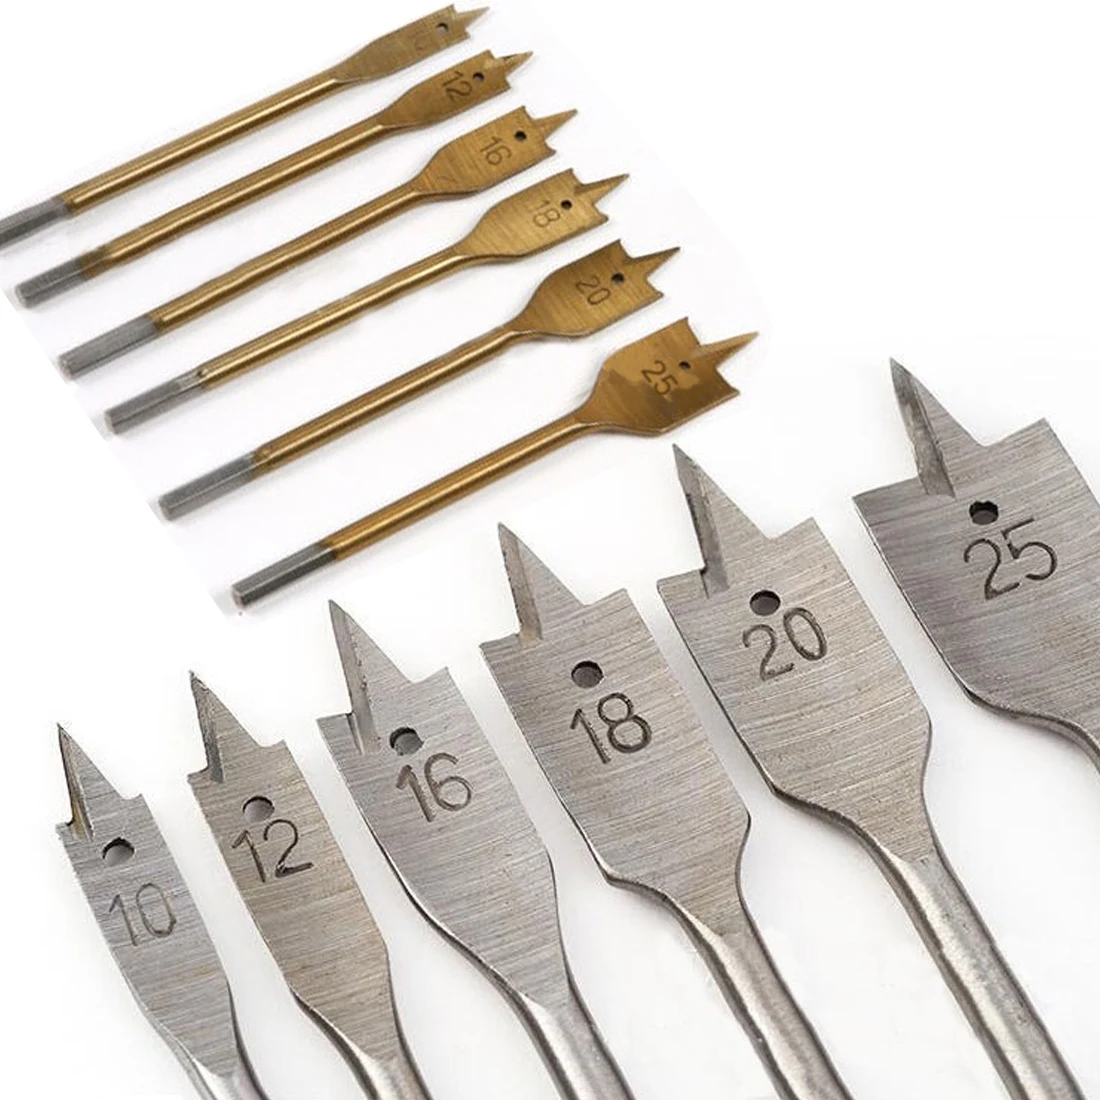 Best drill bits for wood